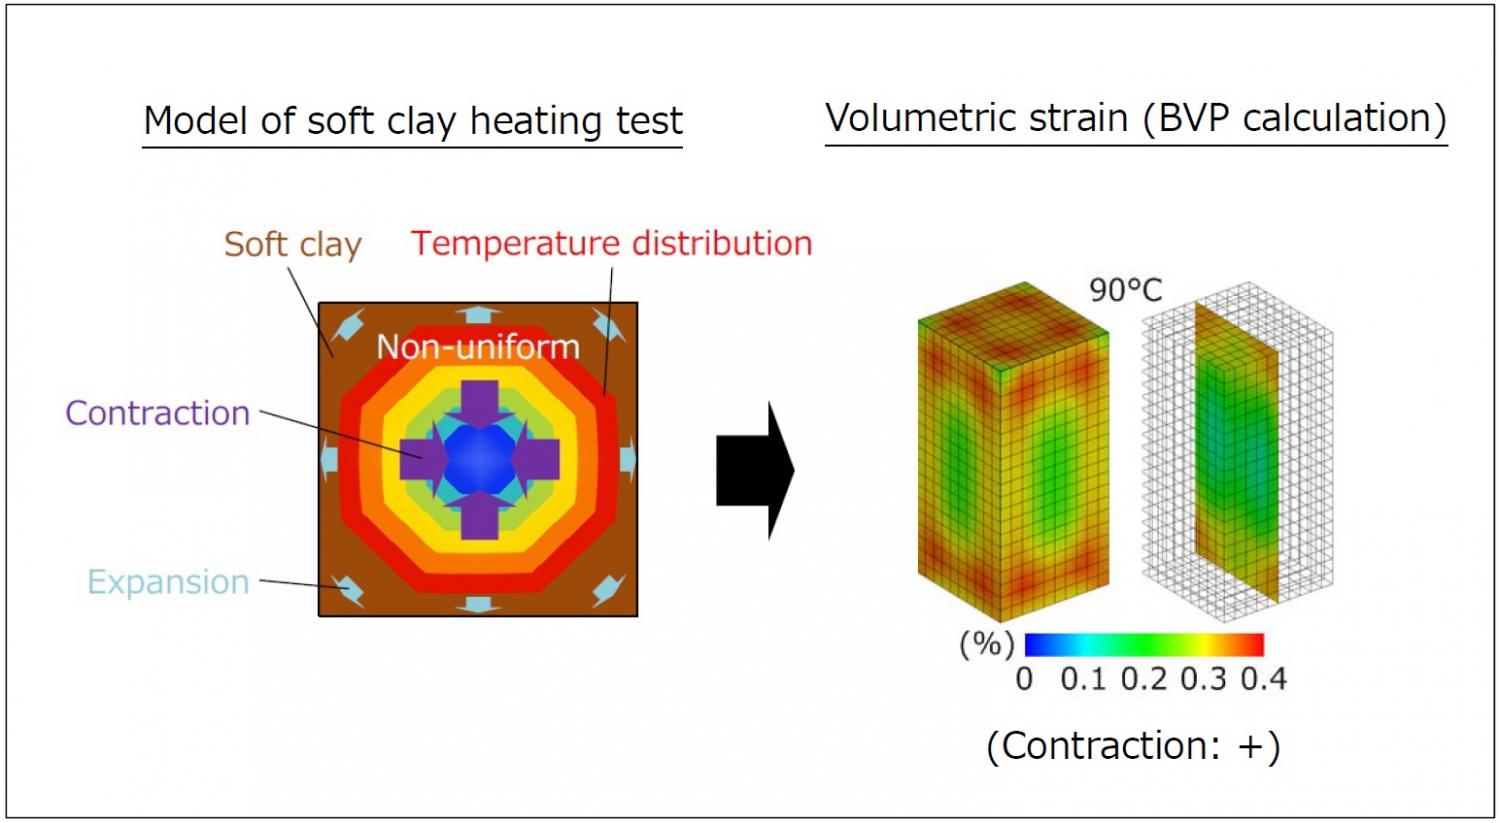 Modeling the contractive behavior of soft clay in a heating test